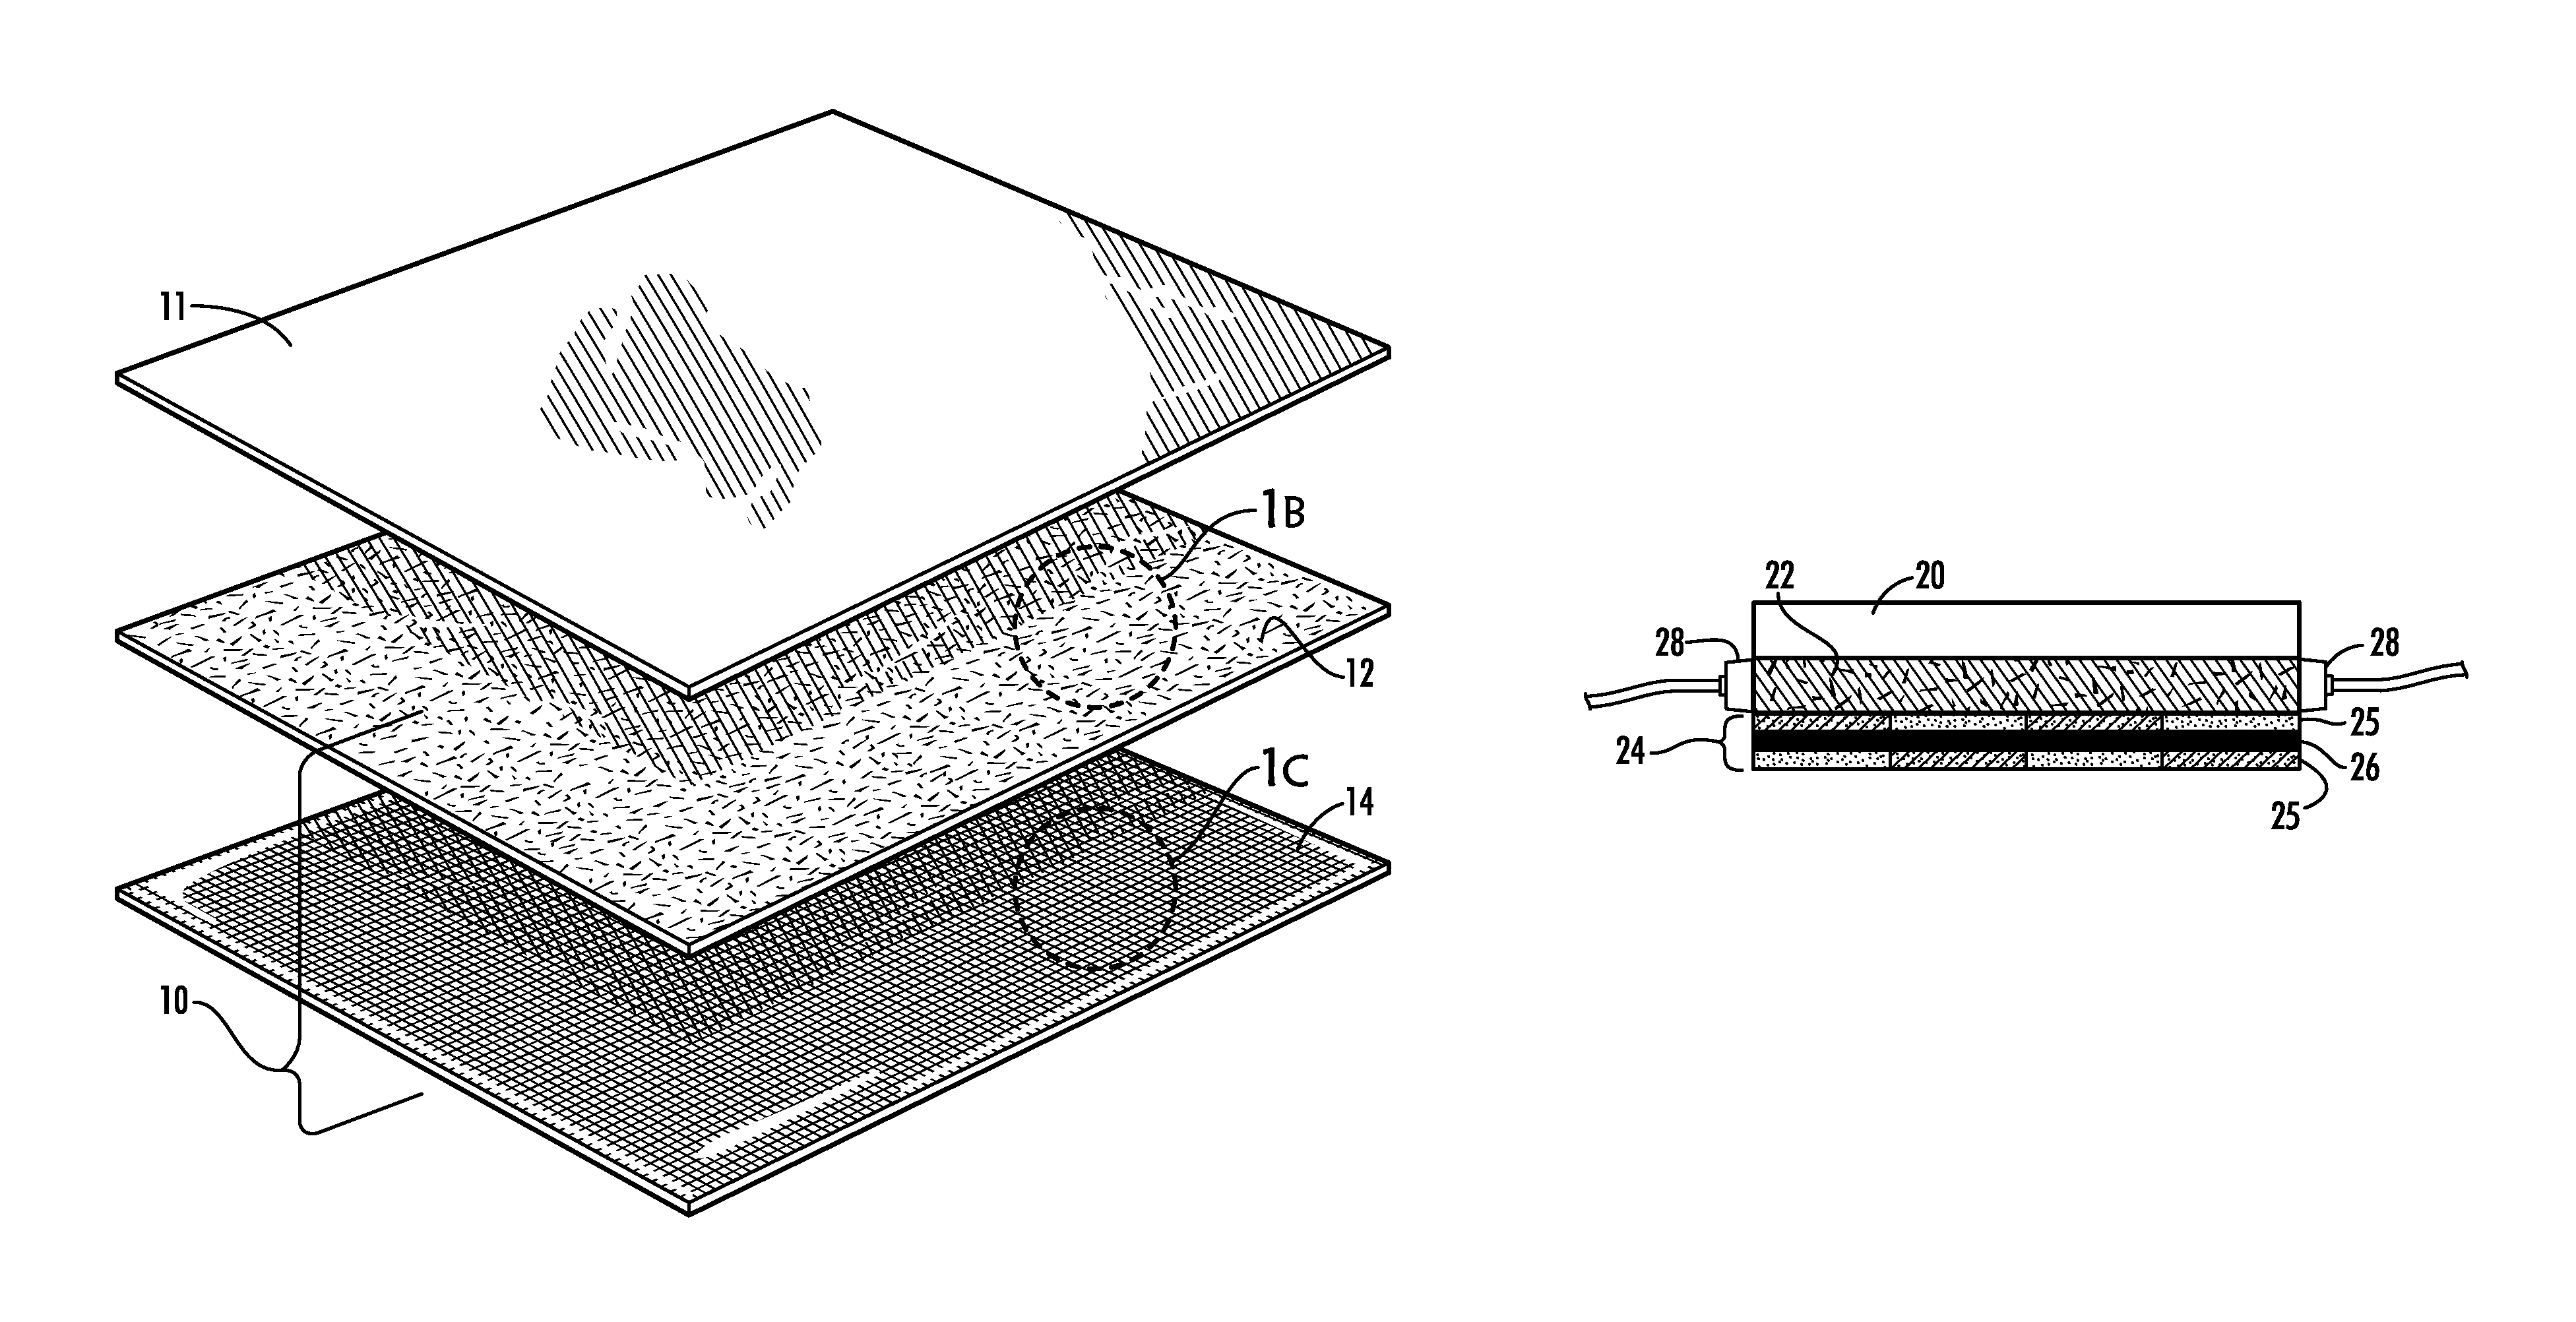 Multilayer system having reconfigurable dynamic structure reinforcement using nanoparticle embedded supramolecular adhesive and method